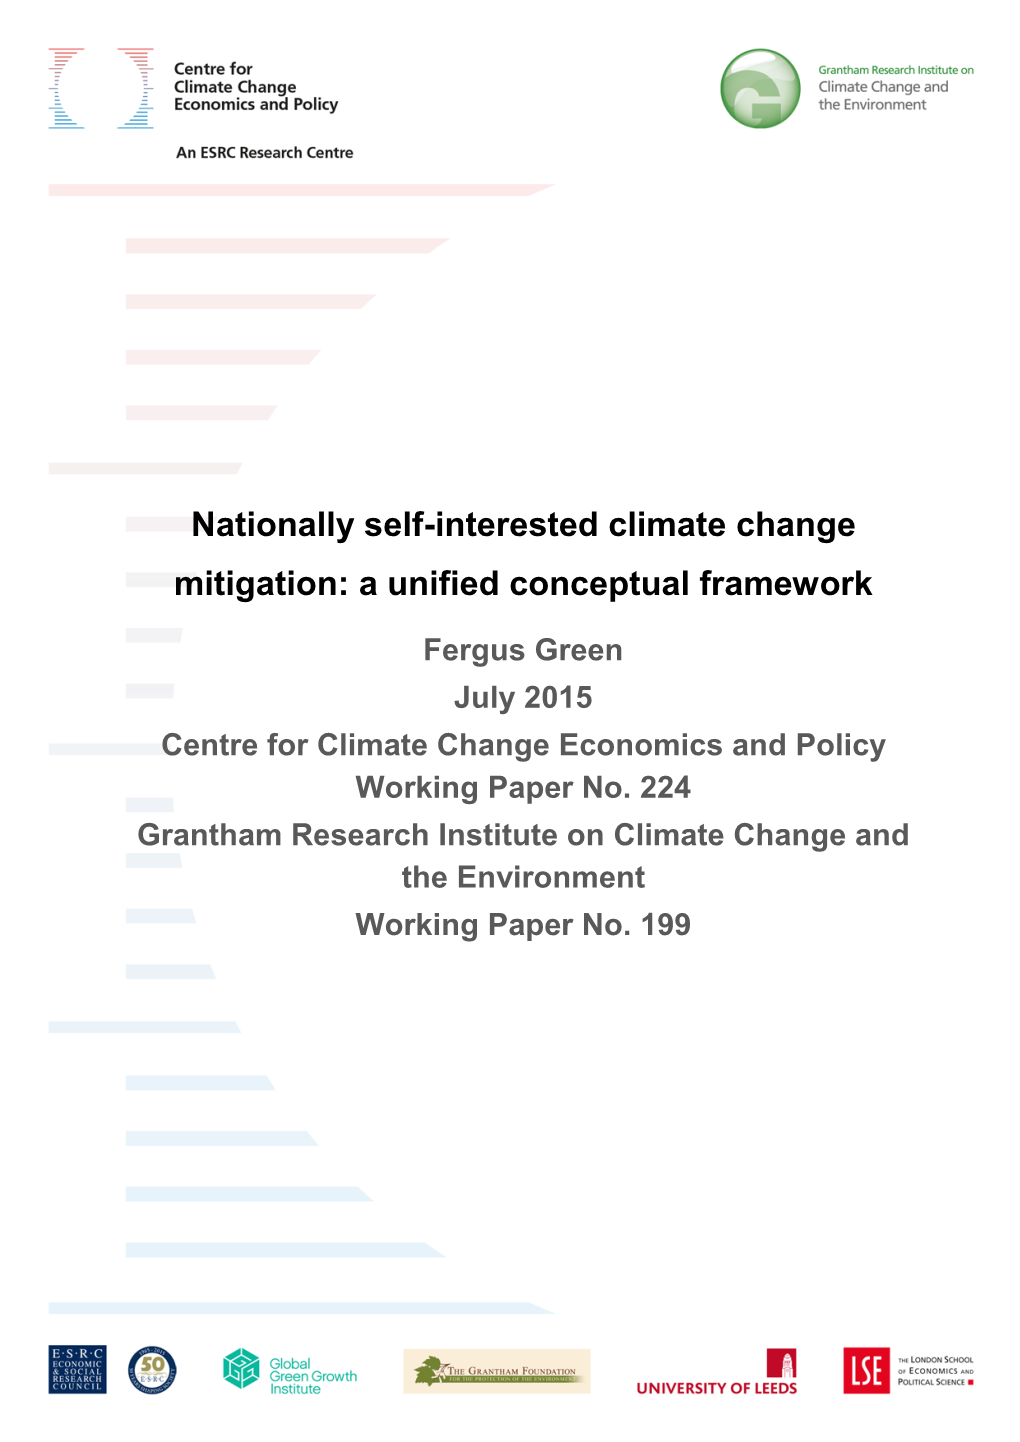 Nationally Self-Interested Climate Change Mitigation: a Unified Conceptual Framework